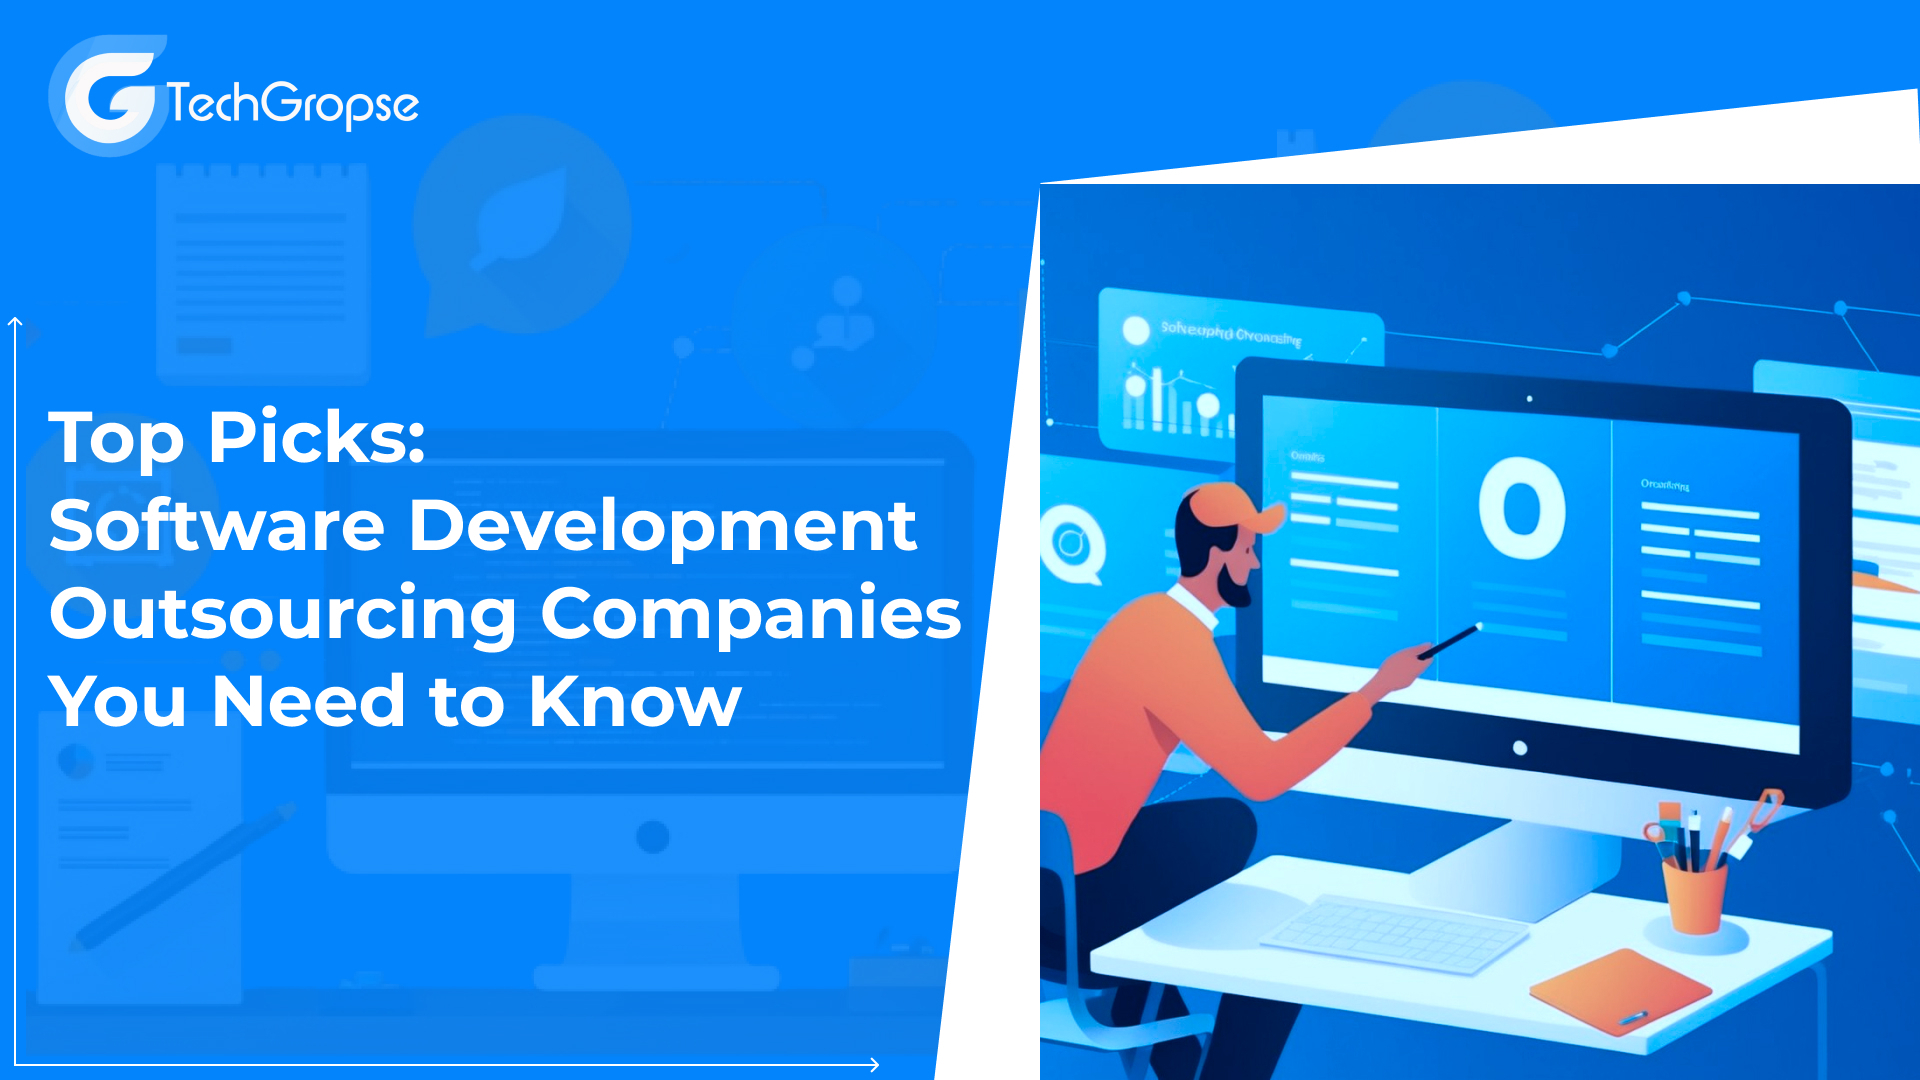 Top Picks: Software Development Outsourcing Companies You Need to Know